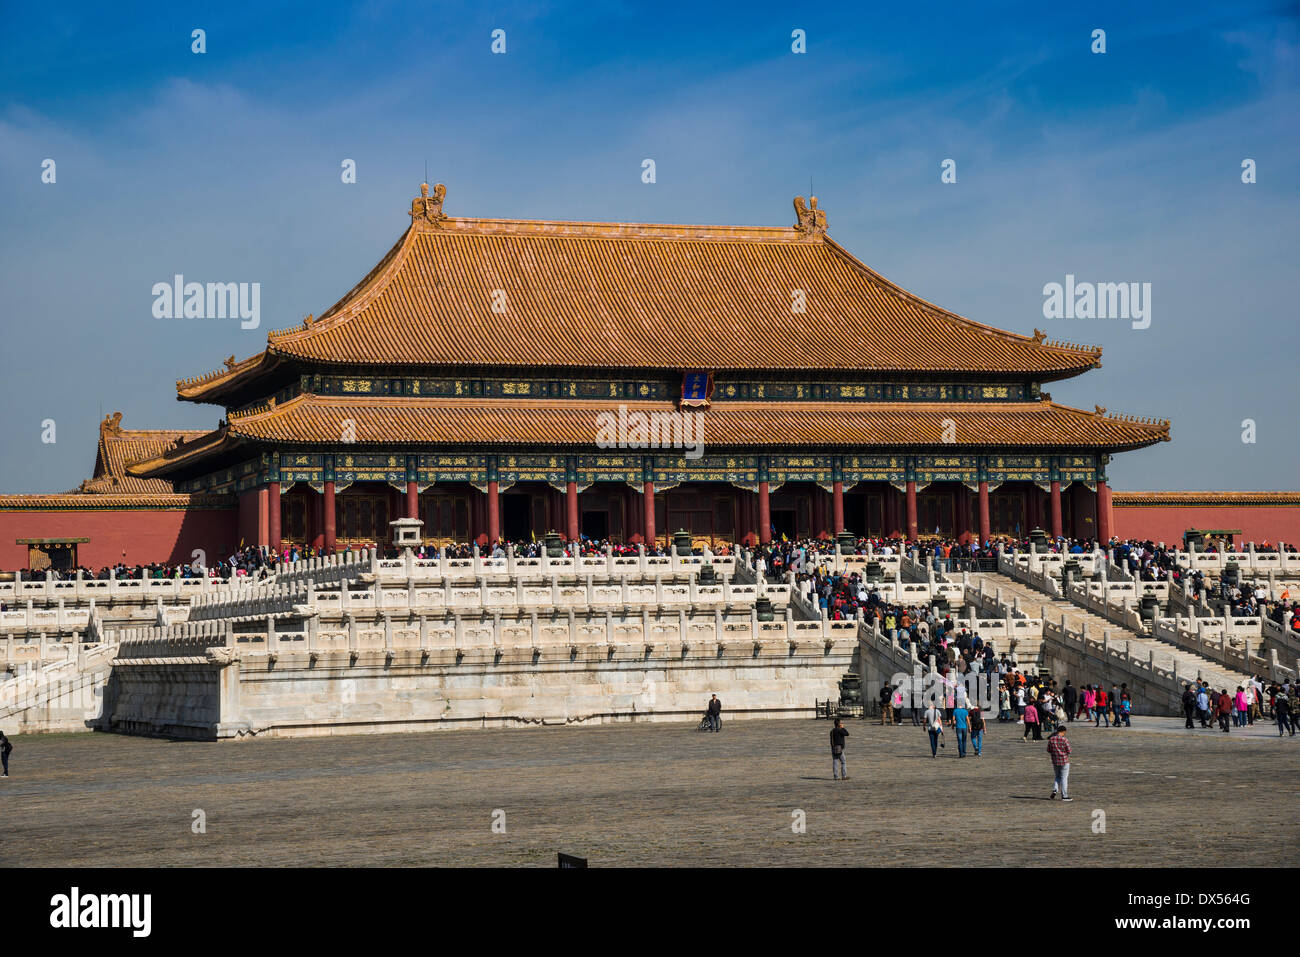 Imperial Palace, Forbidden City, Beijing, Chine Banque D'Images